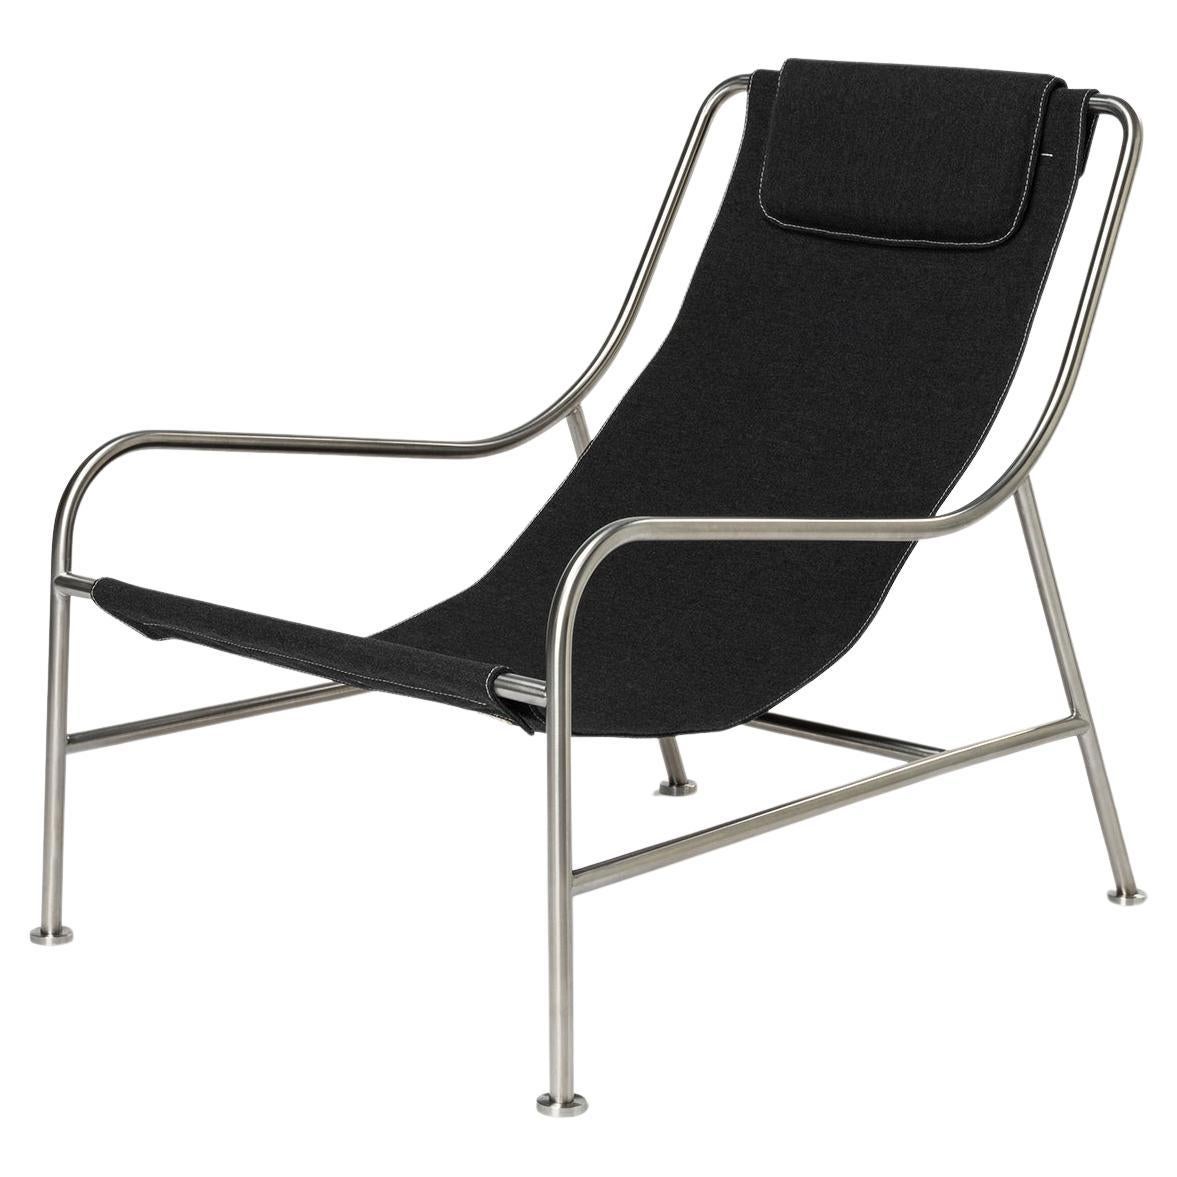 Minimalist Outdoor Lounge Chair in "Char" Fabric and Polished Stainless Steel